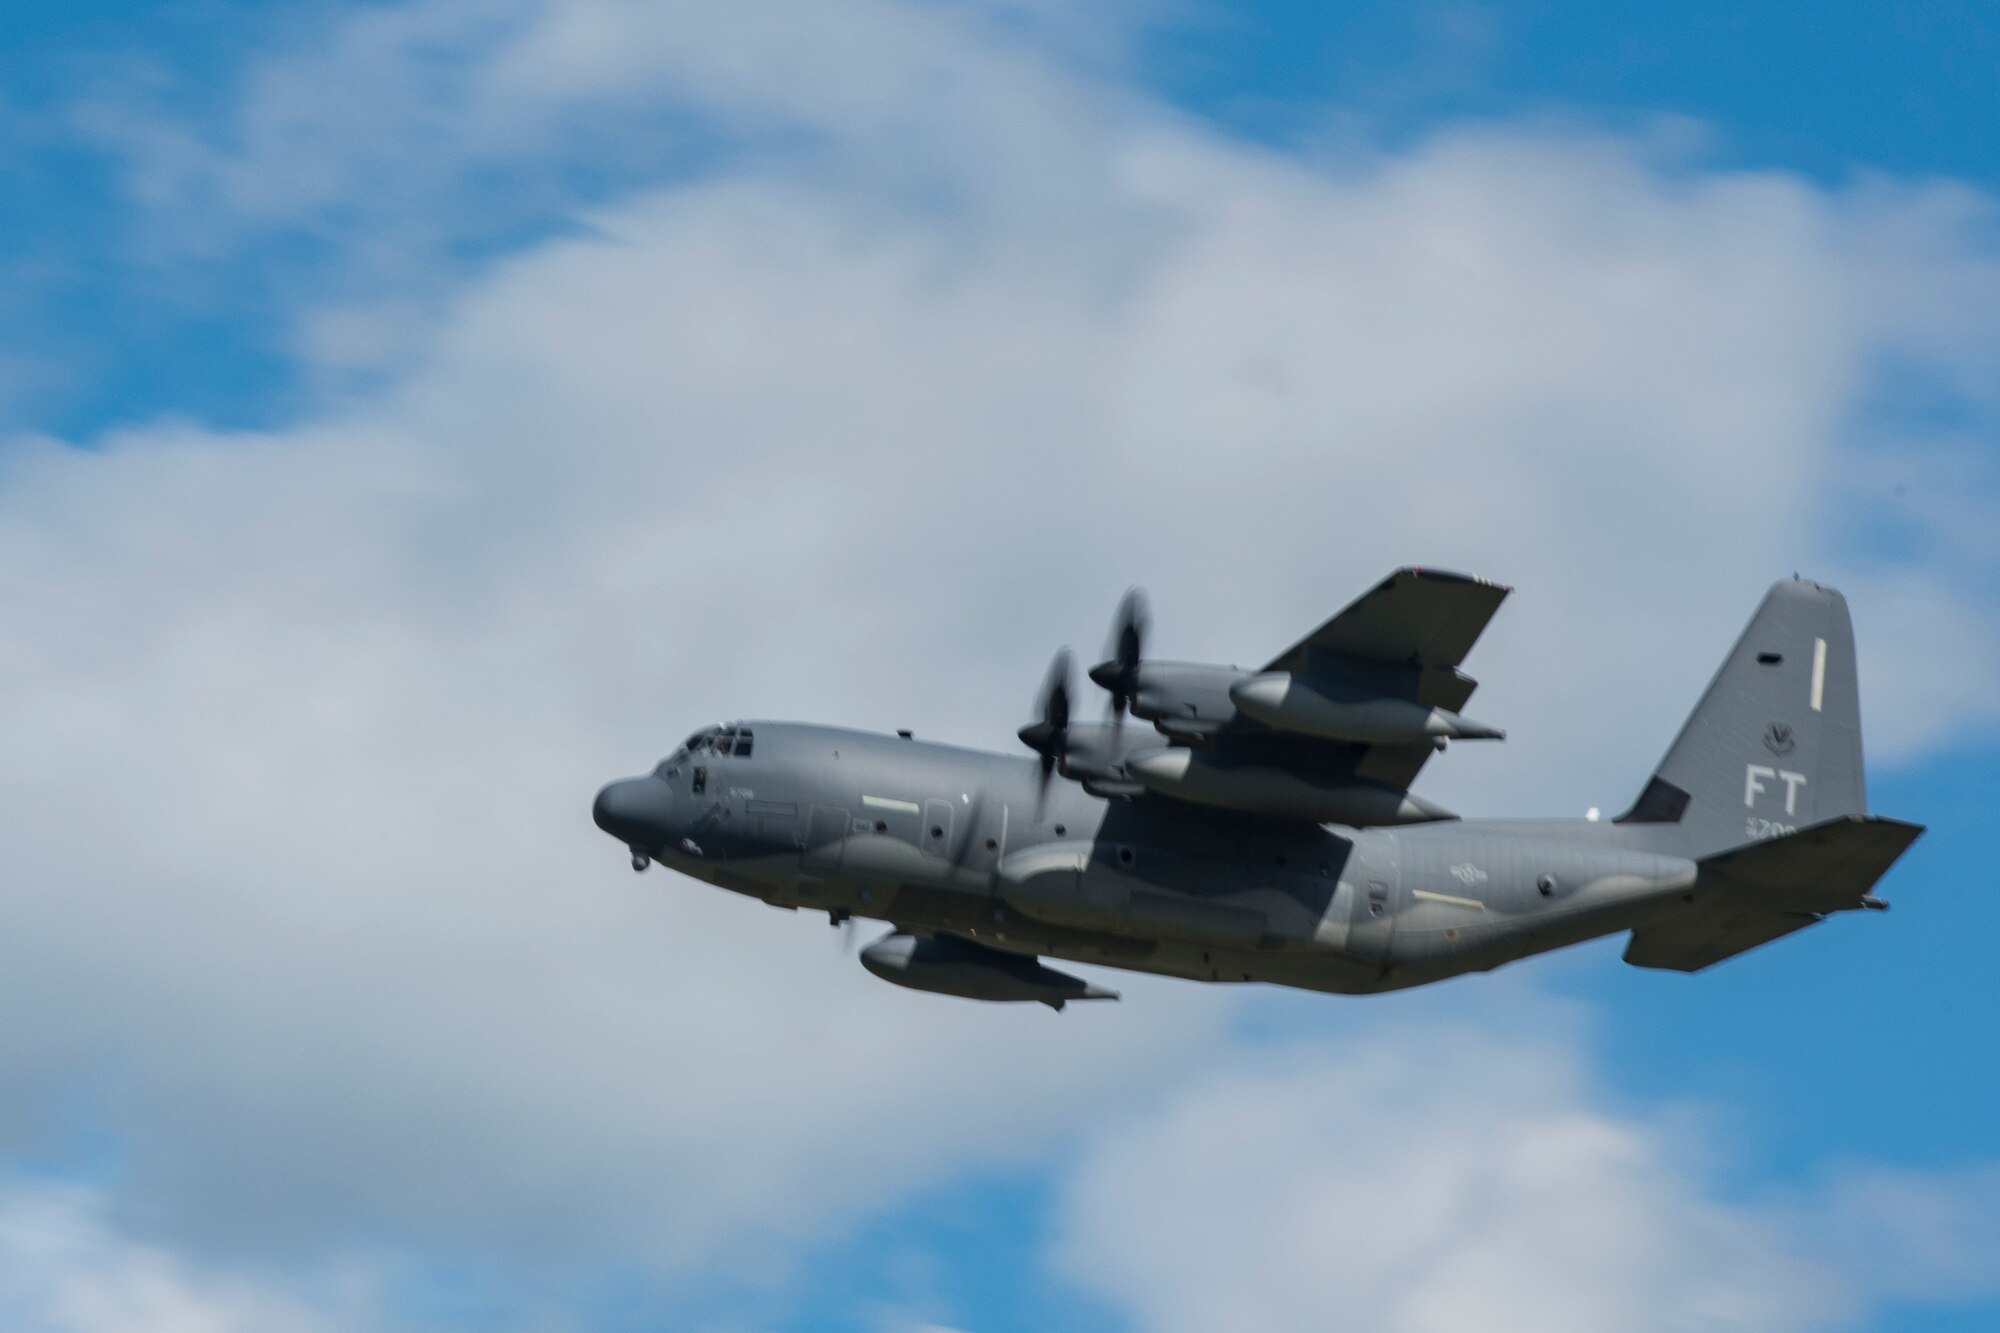 A HC-130J Combat King II departs to provide Tropical Storm Florence rescue support Sept. 15, 2018, at Moody Air Force Base, Ga. The 334th Air Expeditionary Group launched HC-130J Combat King IIs, HH-60G Pavehawks, aircrew and support personnel to pre-position at Joint Base Charleston, S.C., for potential Tropical Storm Florence response. Under the command of Col. John Creel, the 374th Rescue Group commander, the AEG integrated to make one expeditionary search and rescue unit comprised of rescue and support personnel from both the 23d Wing, 920th Rescue Wing at Patrick Air Force Base, Fla., and 51st Communications Squadron at Warner Robins Air Force Base, Ga.  (U.S. Air Force photo by Staff Sgt. Eric Summers Jr.)